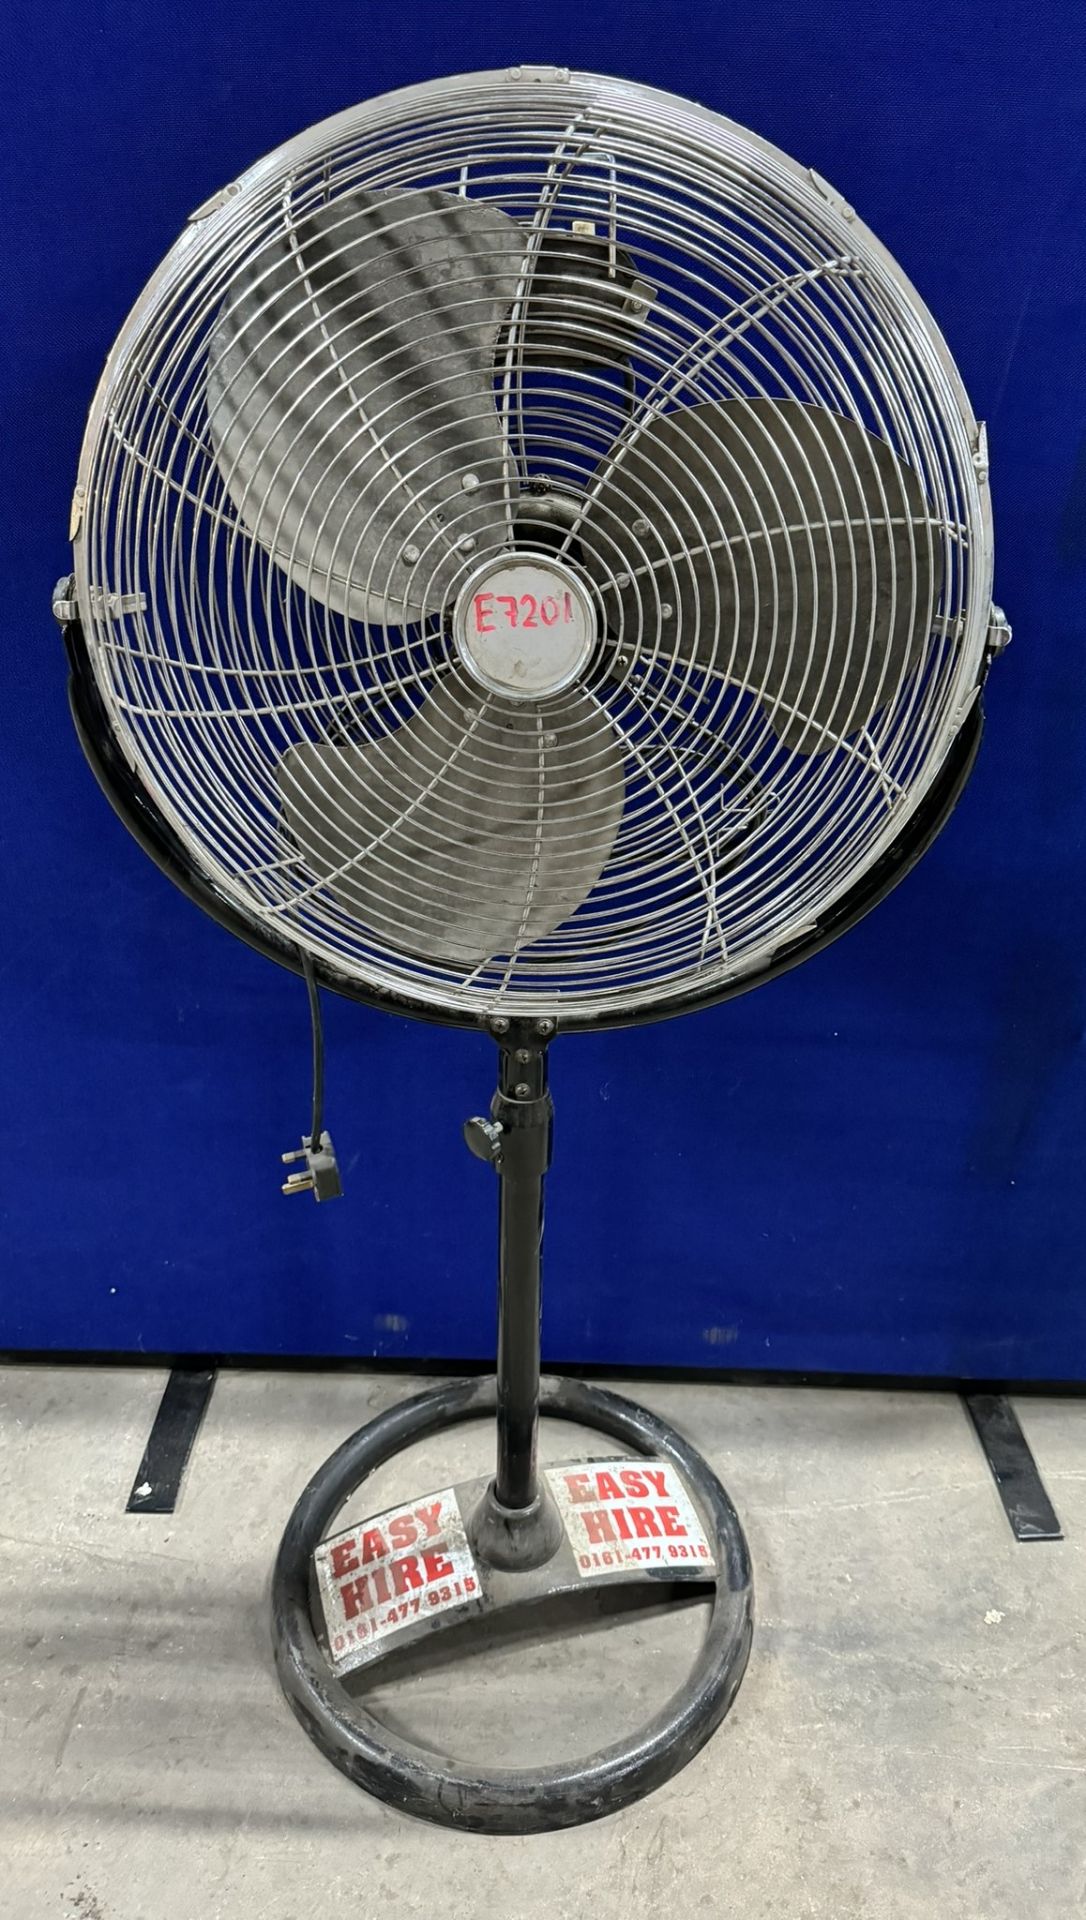 2 x Various Fans - As Pictured